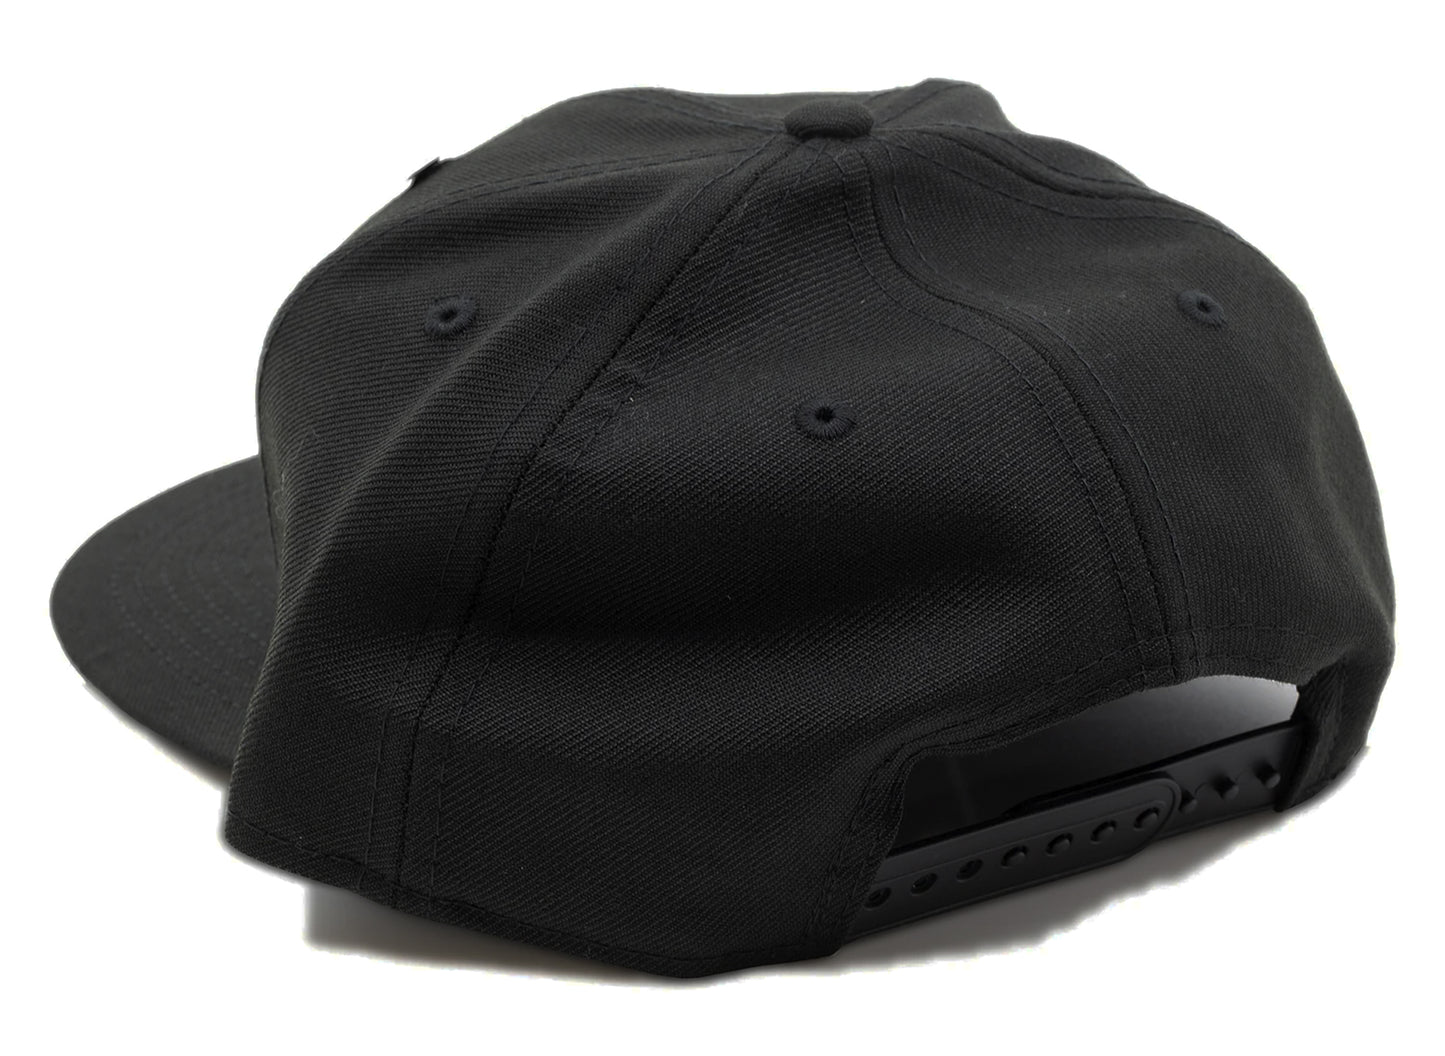 Paper Planes Blackout Crown 9Fifty Snapback Hat